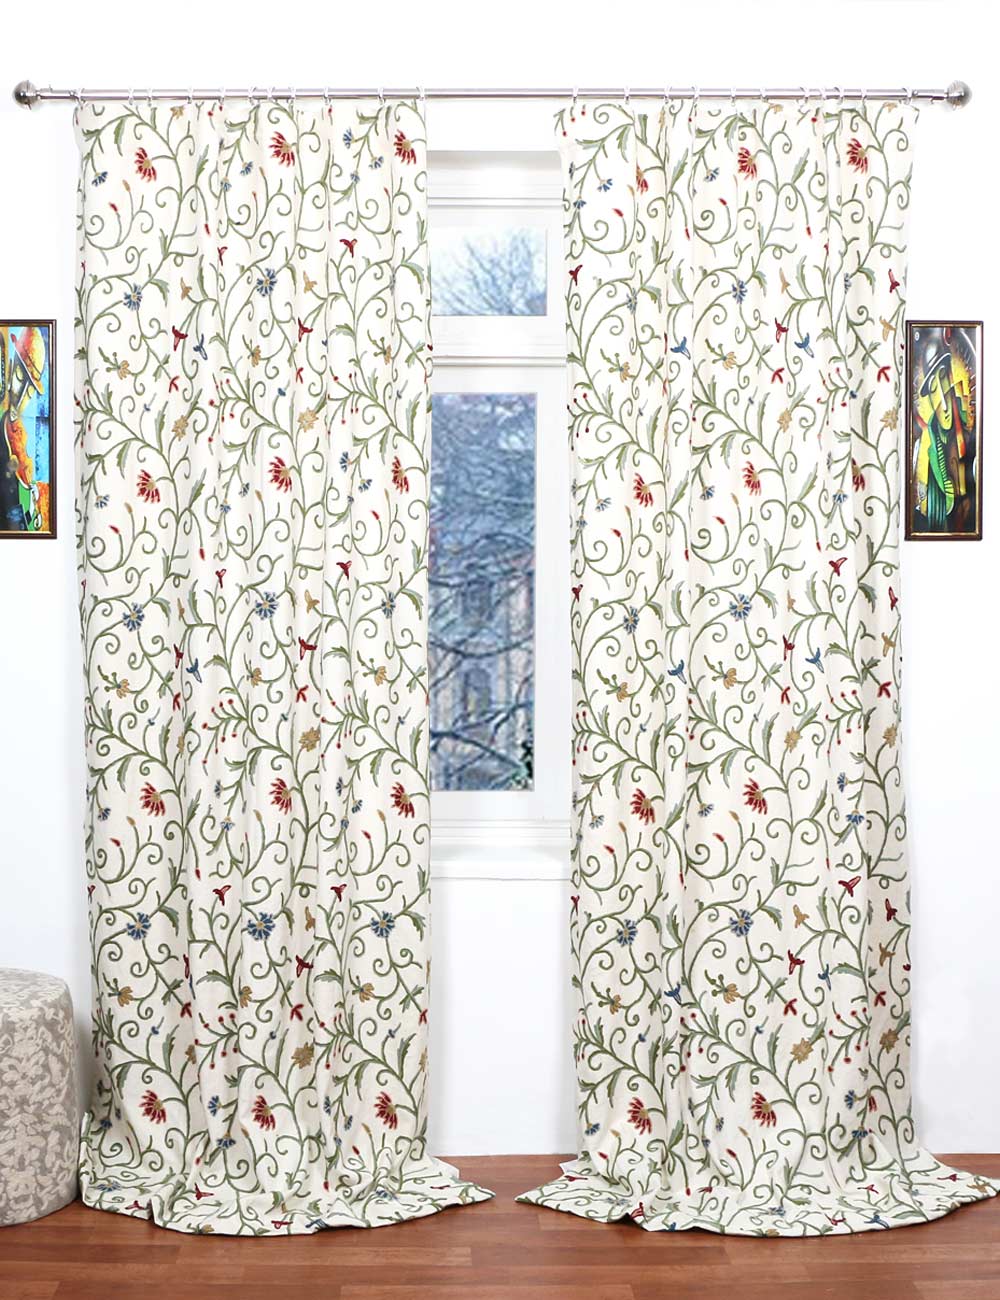 Hand Embroidered Cotton Crewel Curtain Panels